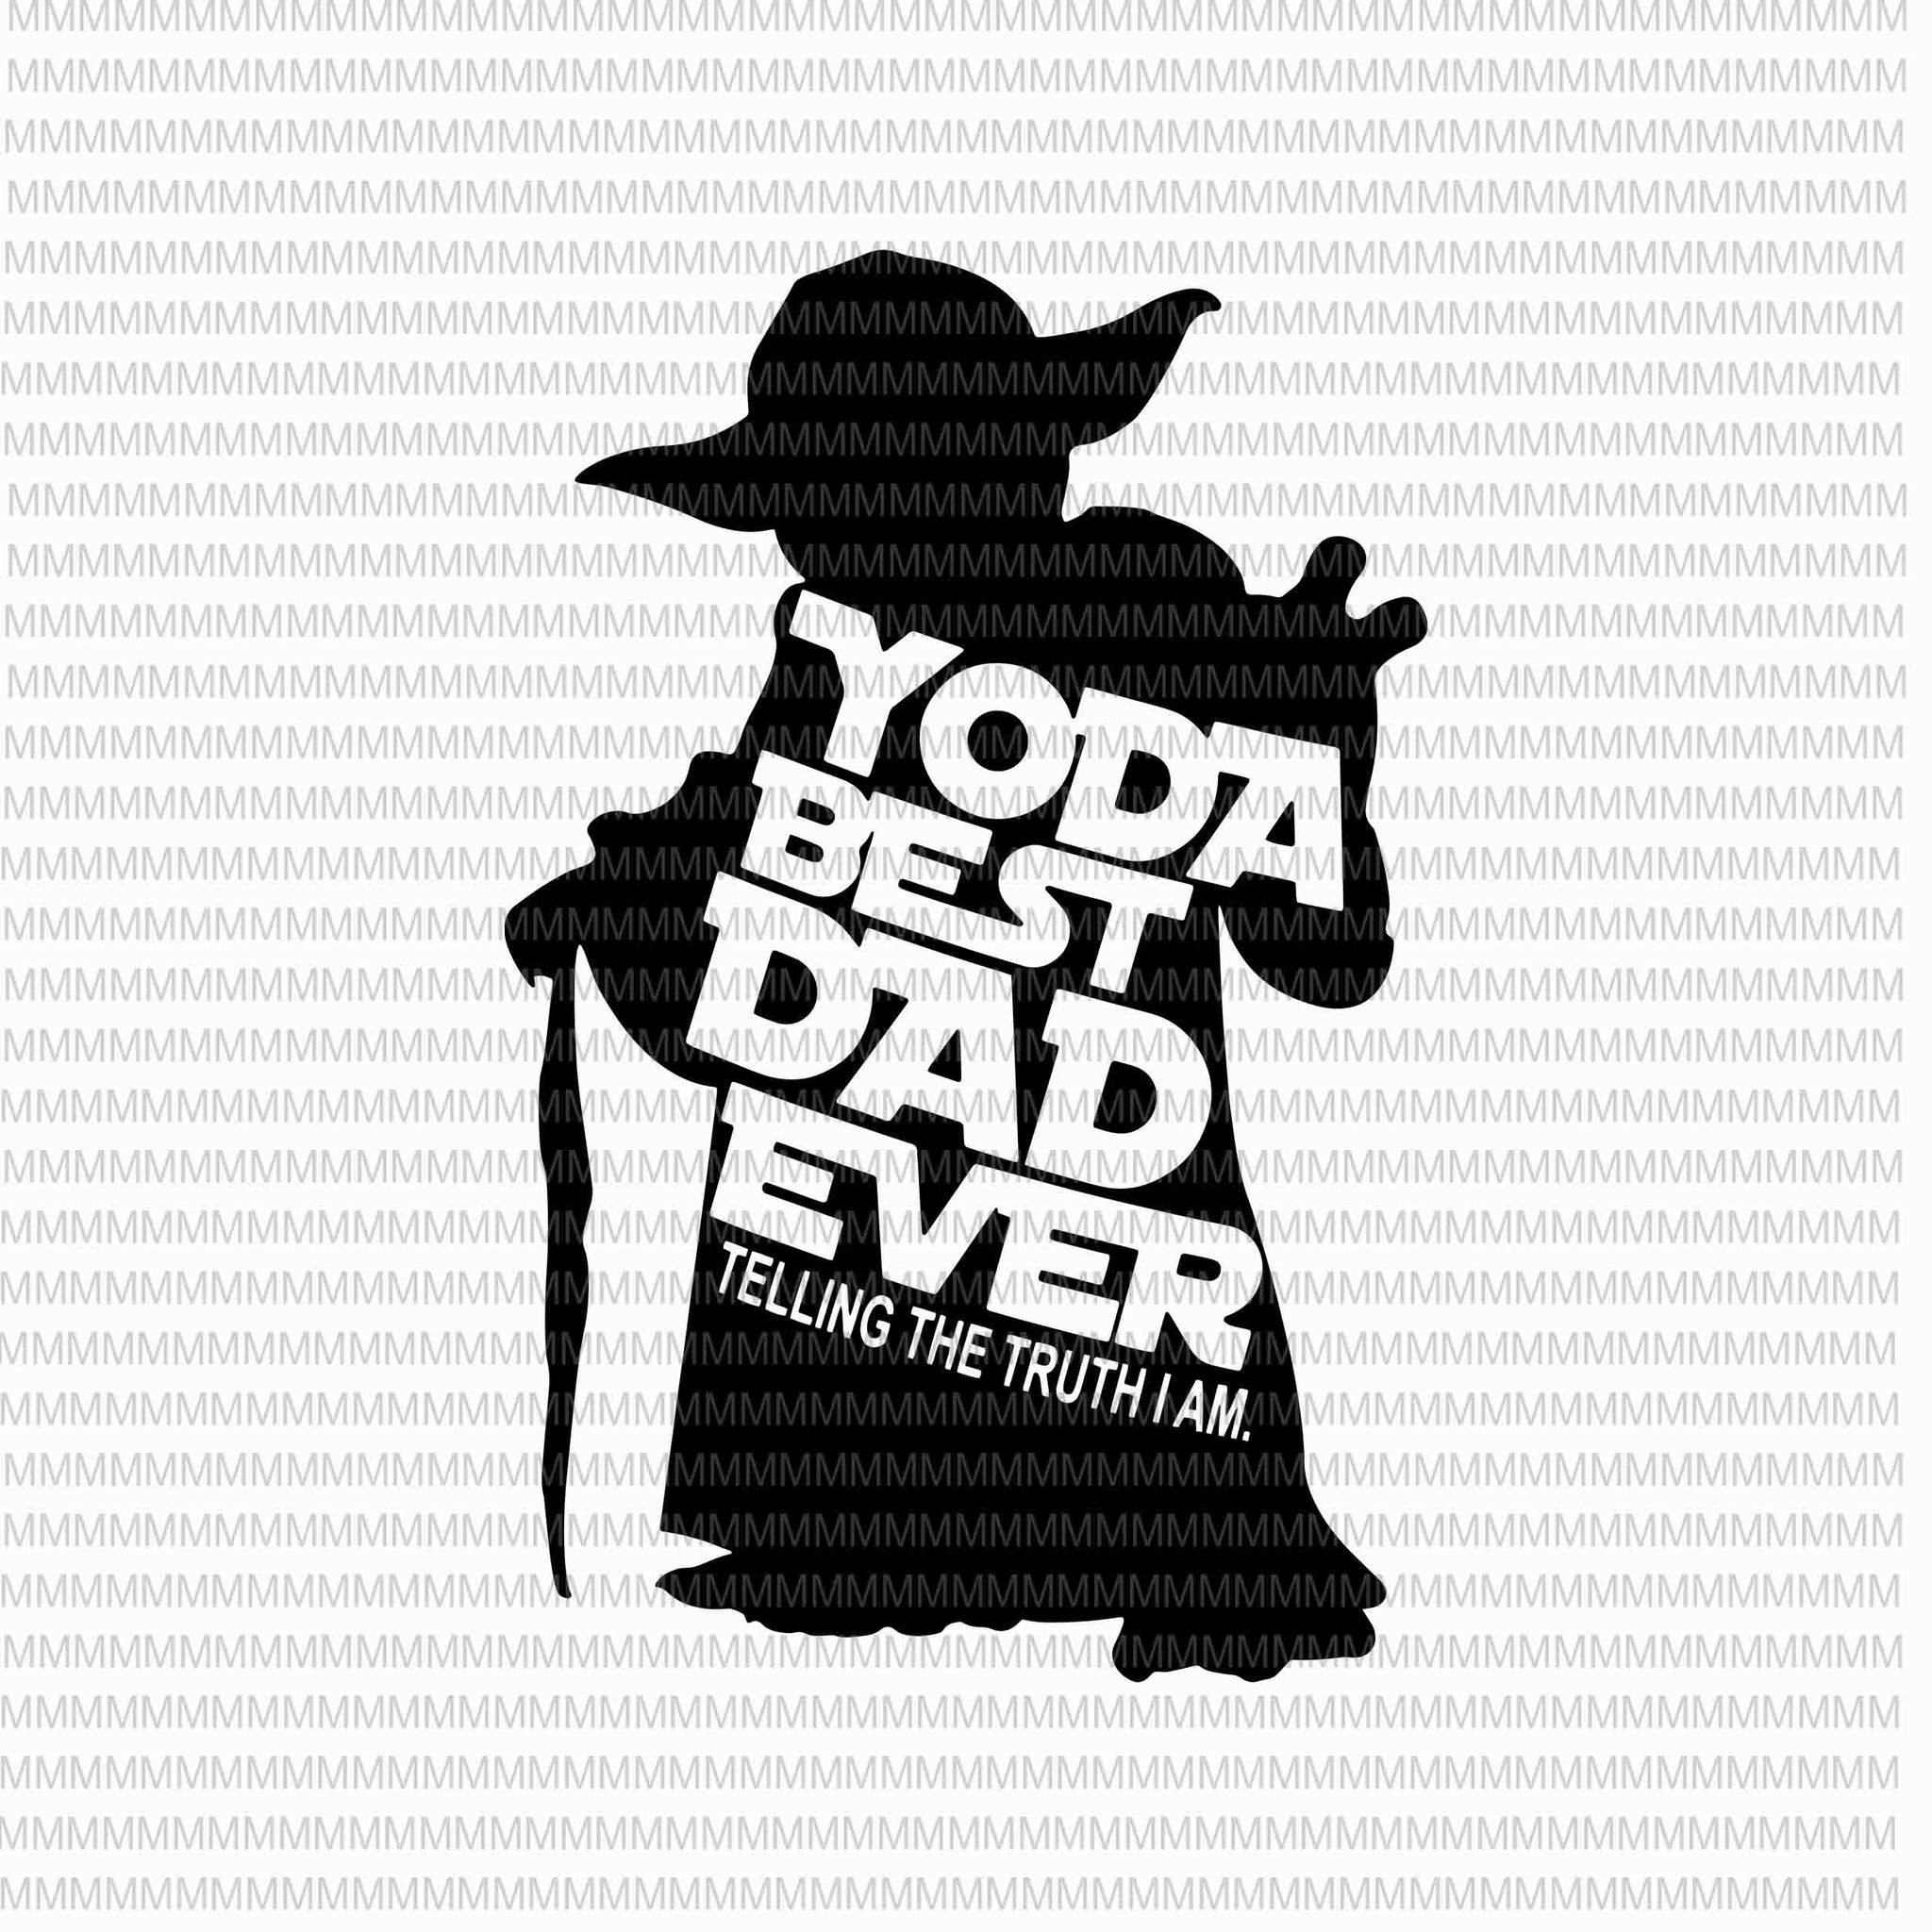 Yoda best dad ever svg, telling the truth i am svg, father's day svg, youda best dad svg, yoda father's day svg